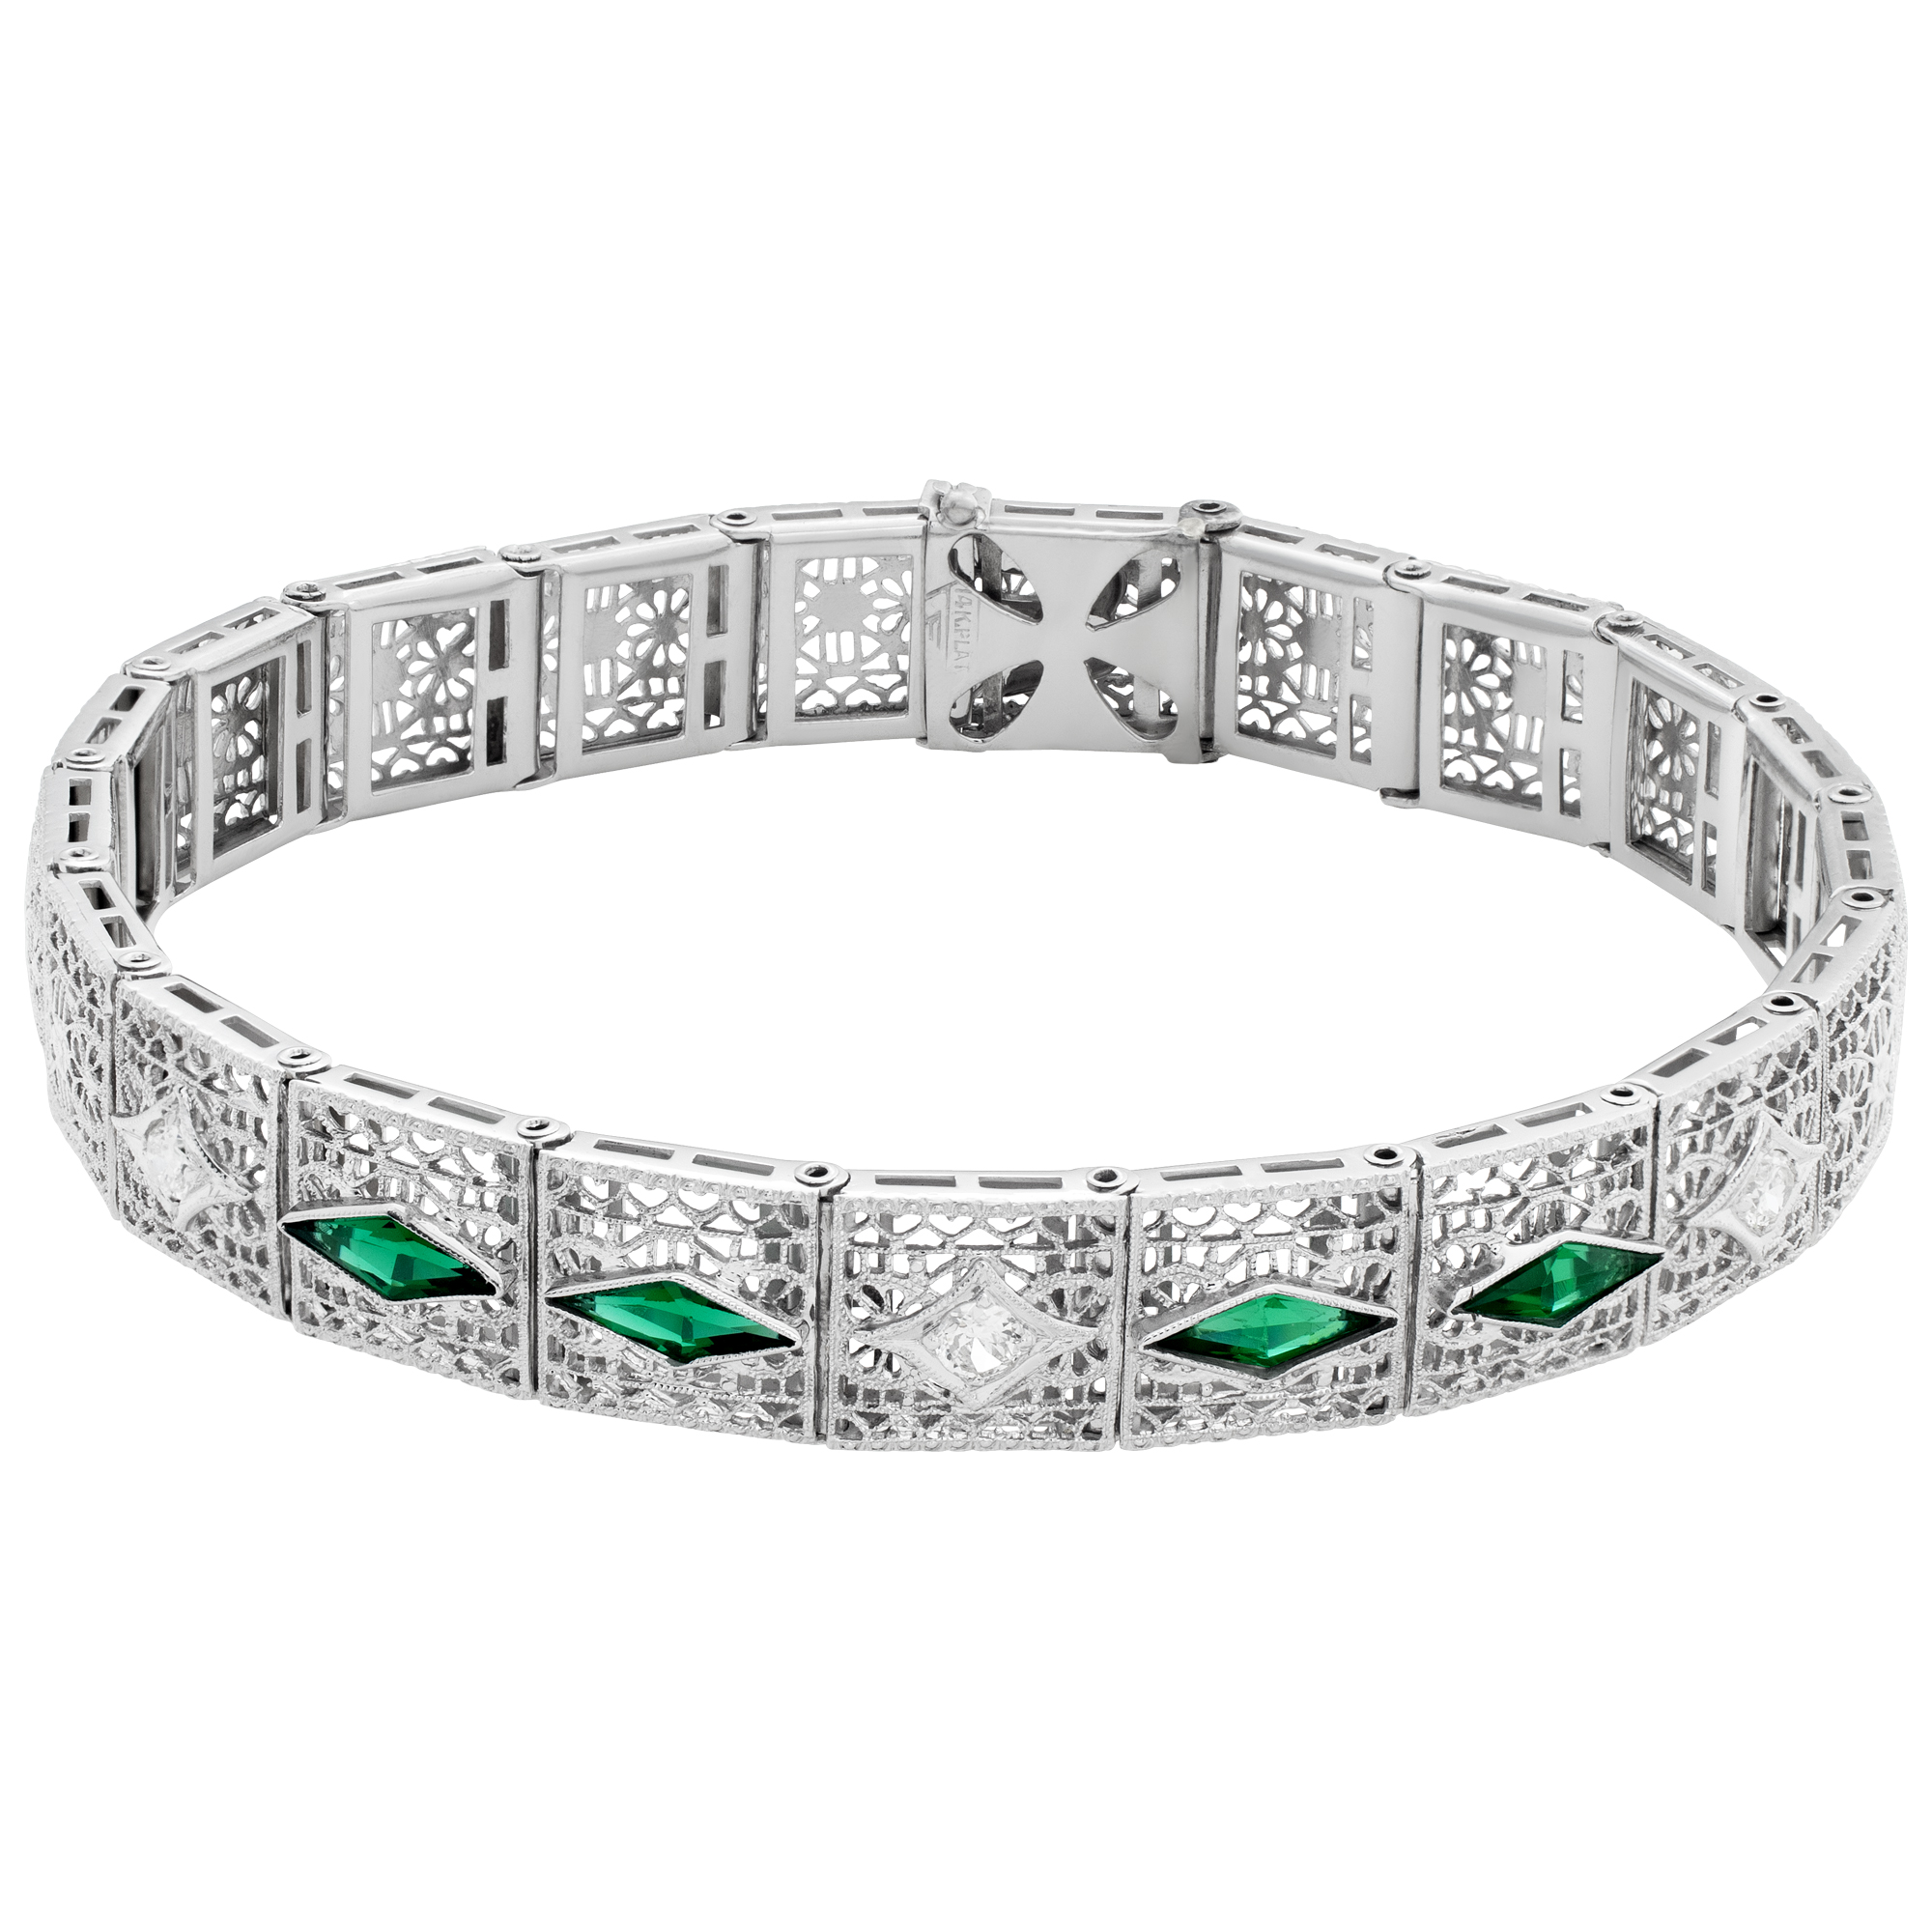 Elegant  line bracelet with synthetic emeralds and diamonds set in filigree 14k white gold, with platinum top